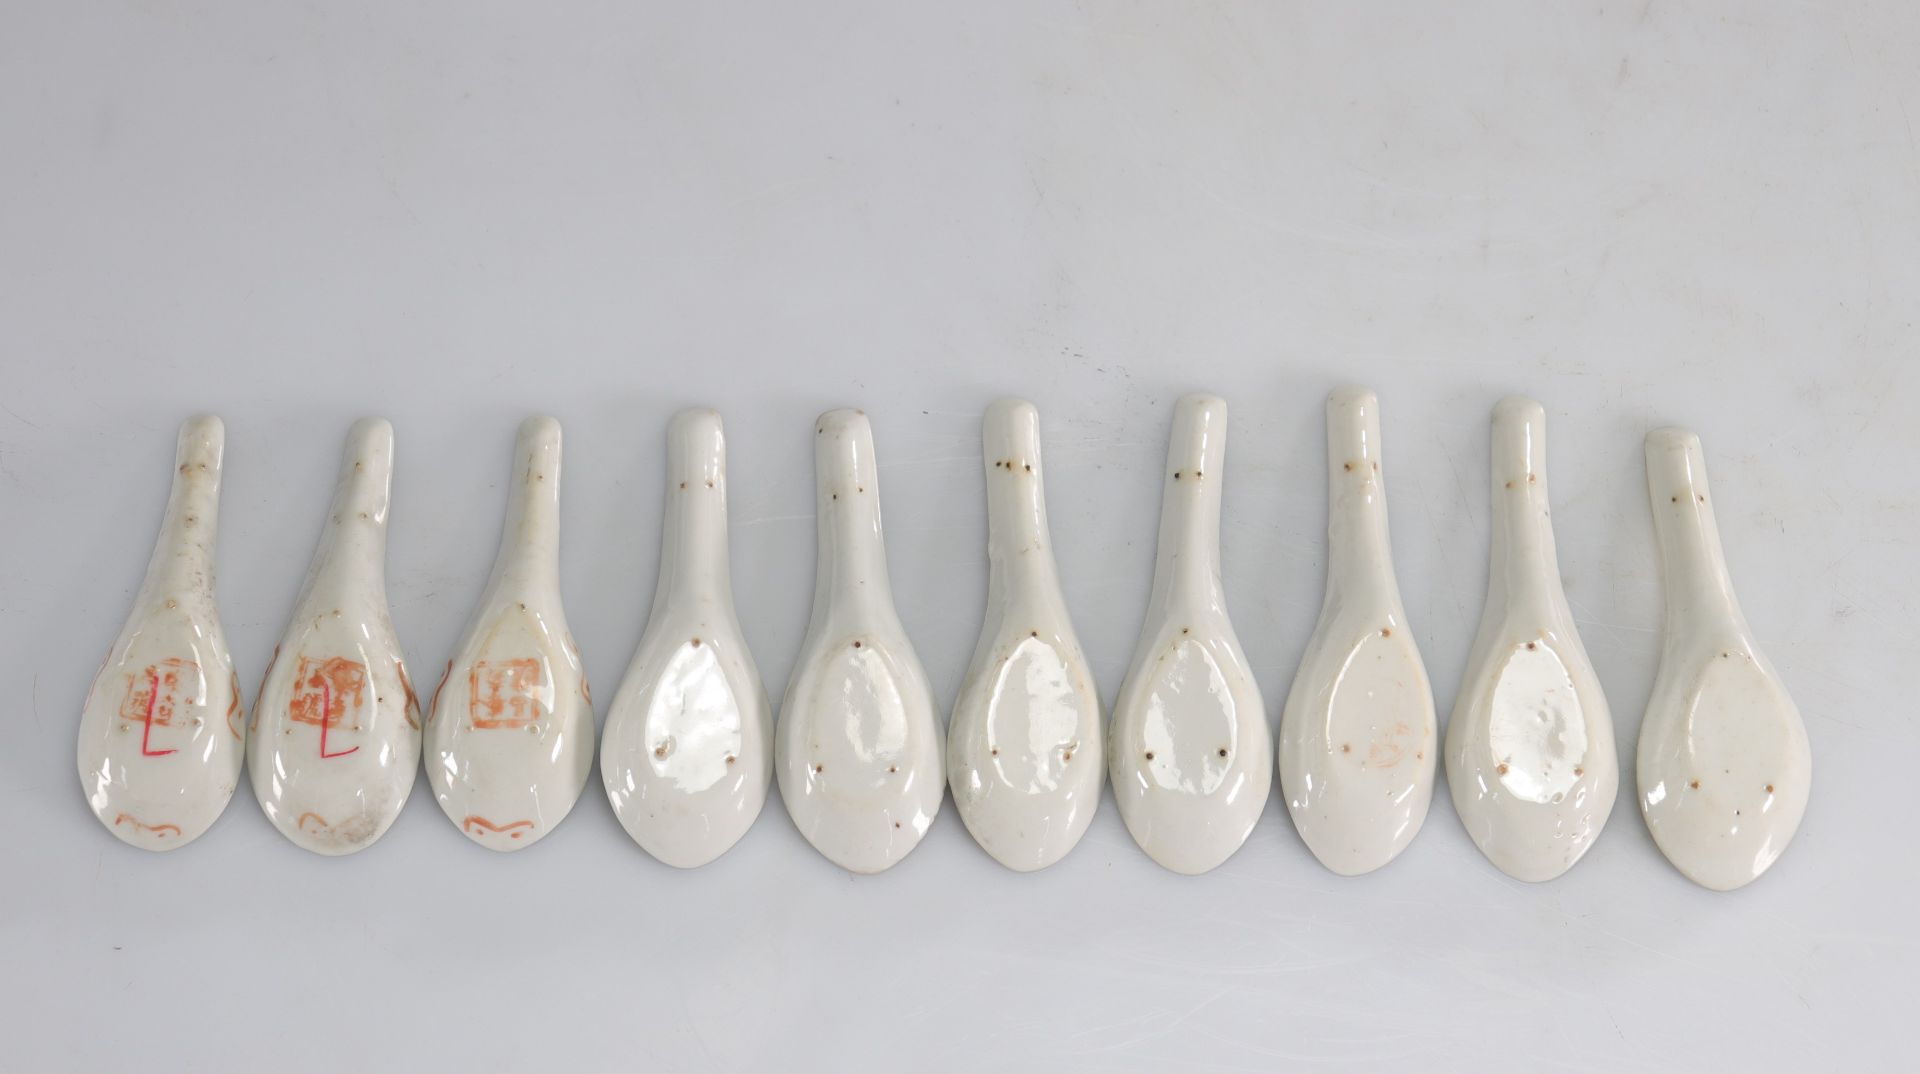 Spoons (10) in Chinese famille rose porcelain various decorations - Image 2 of 2